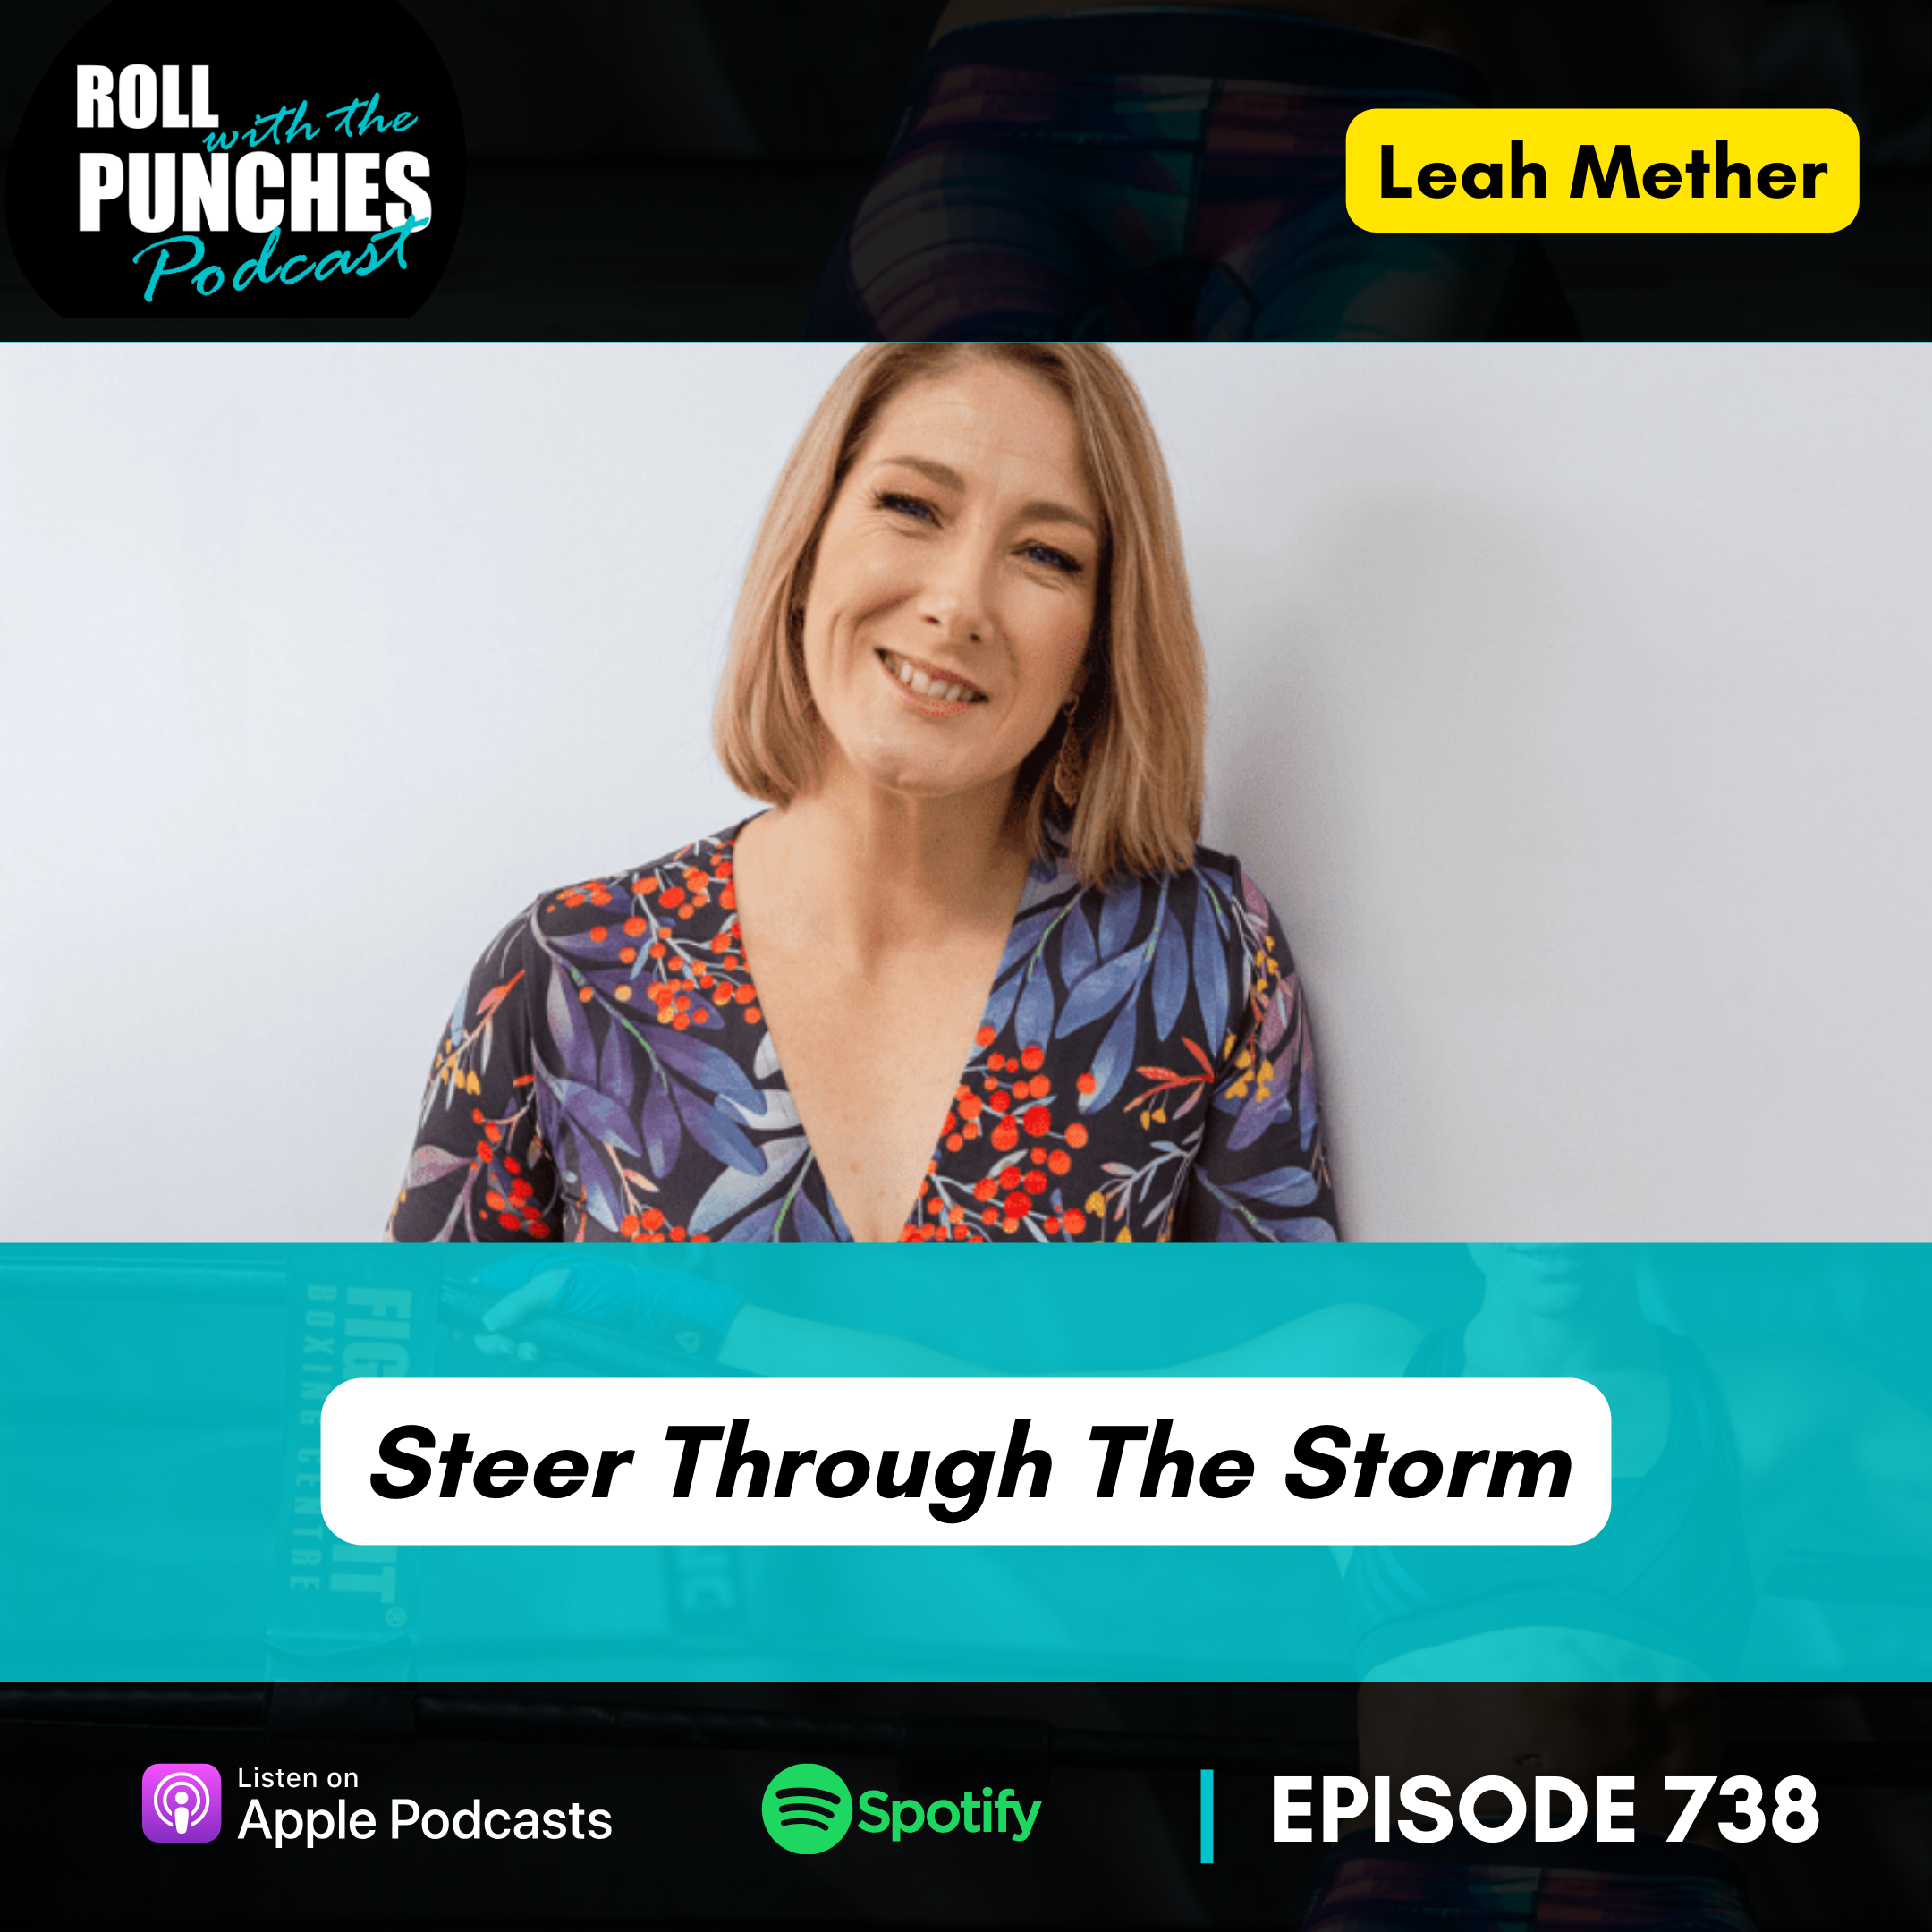 Steer Through The Storm - How to Communicate & Lead Courageously Through Change | Leah Mether - 738